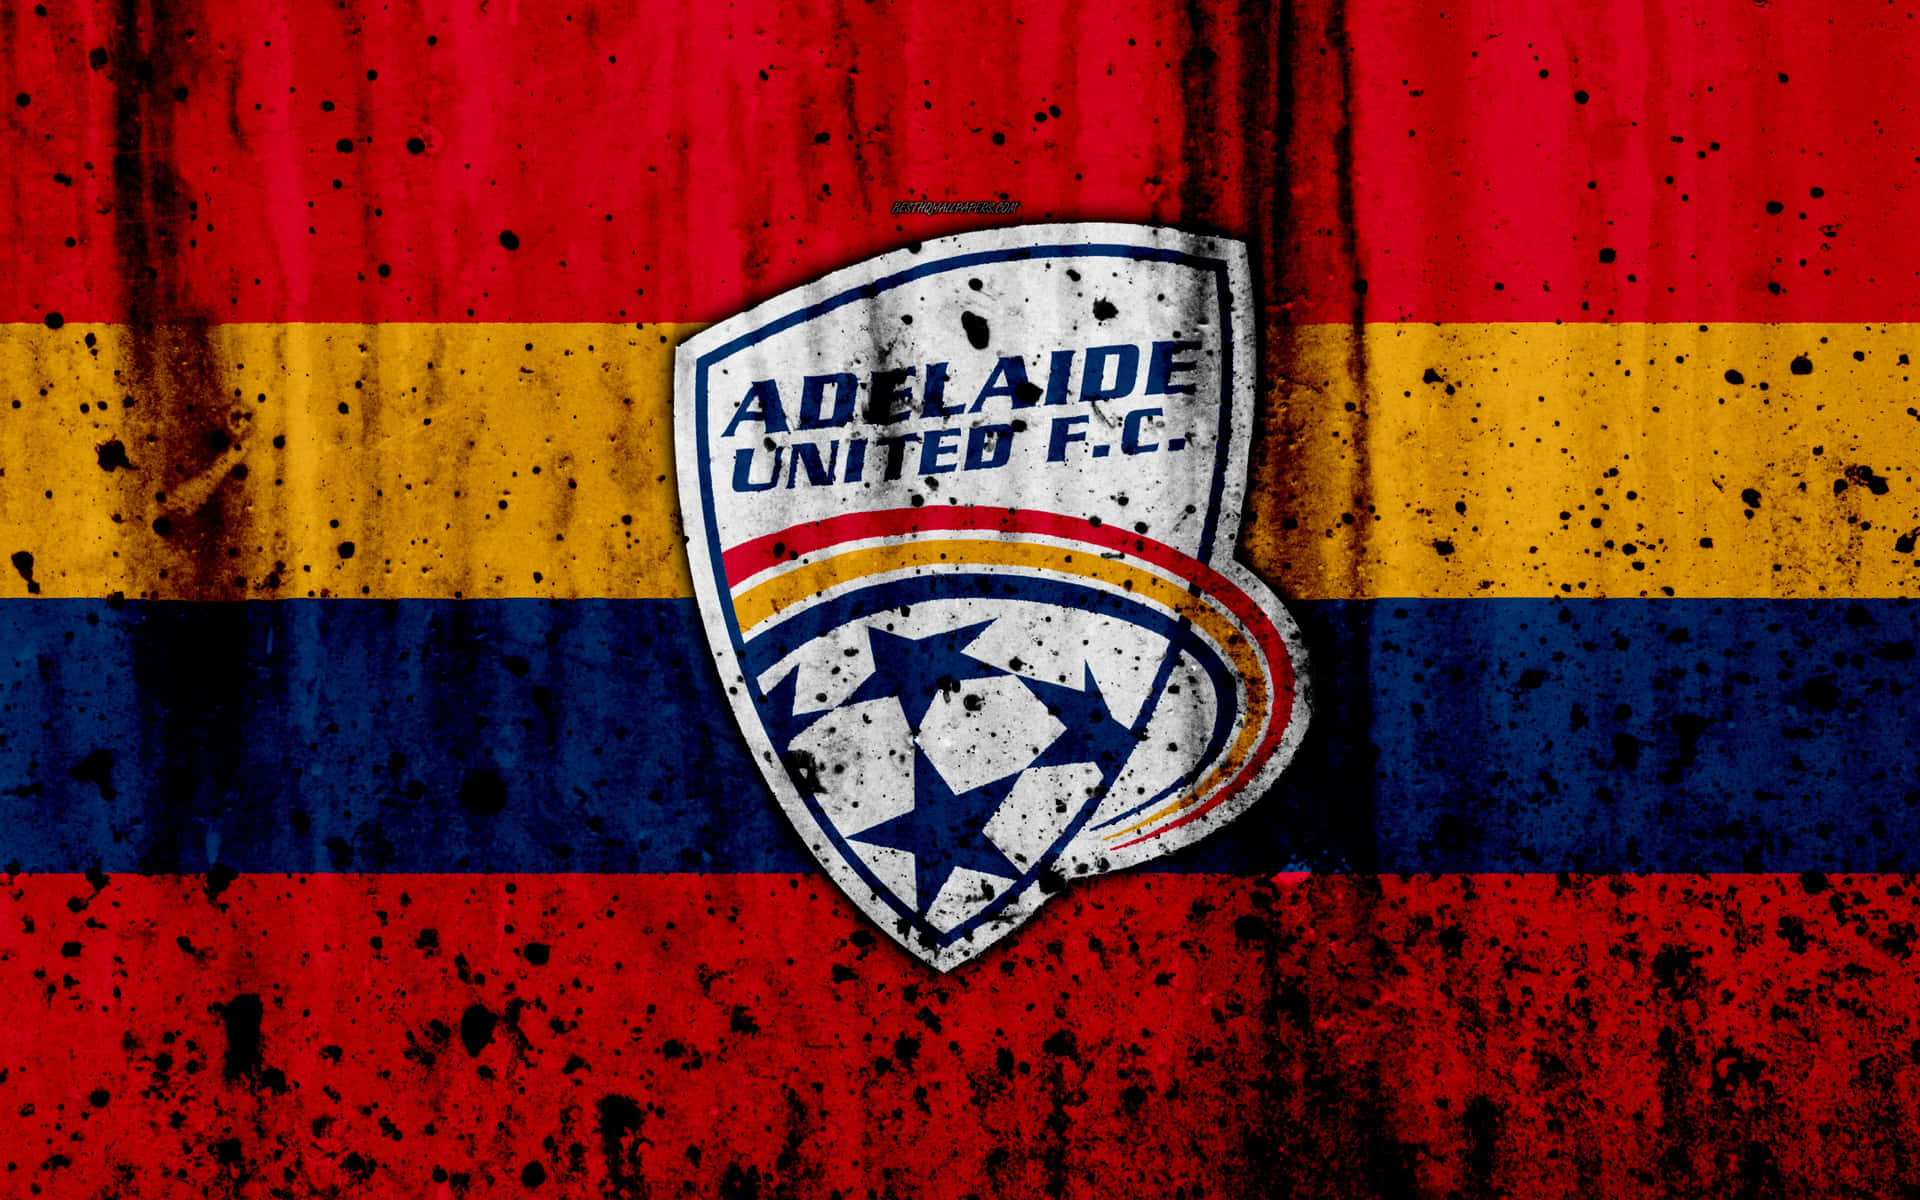 Adelaide United Football Club in Action Wallpaper